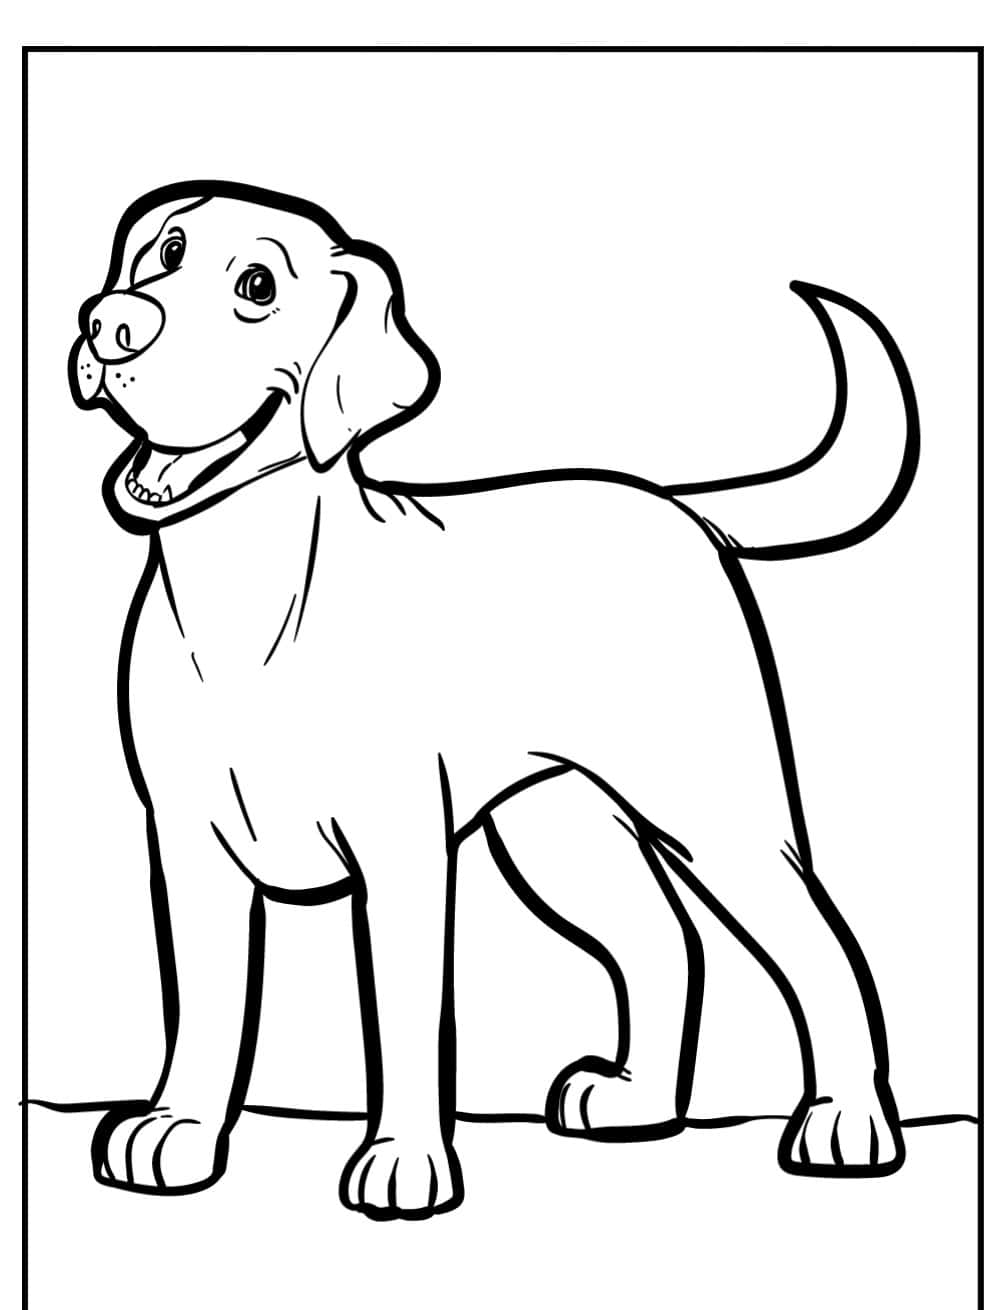 Download labrador dog coloring page picture